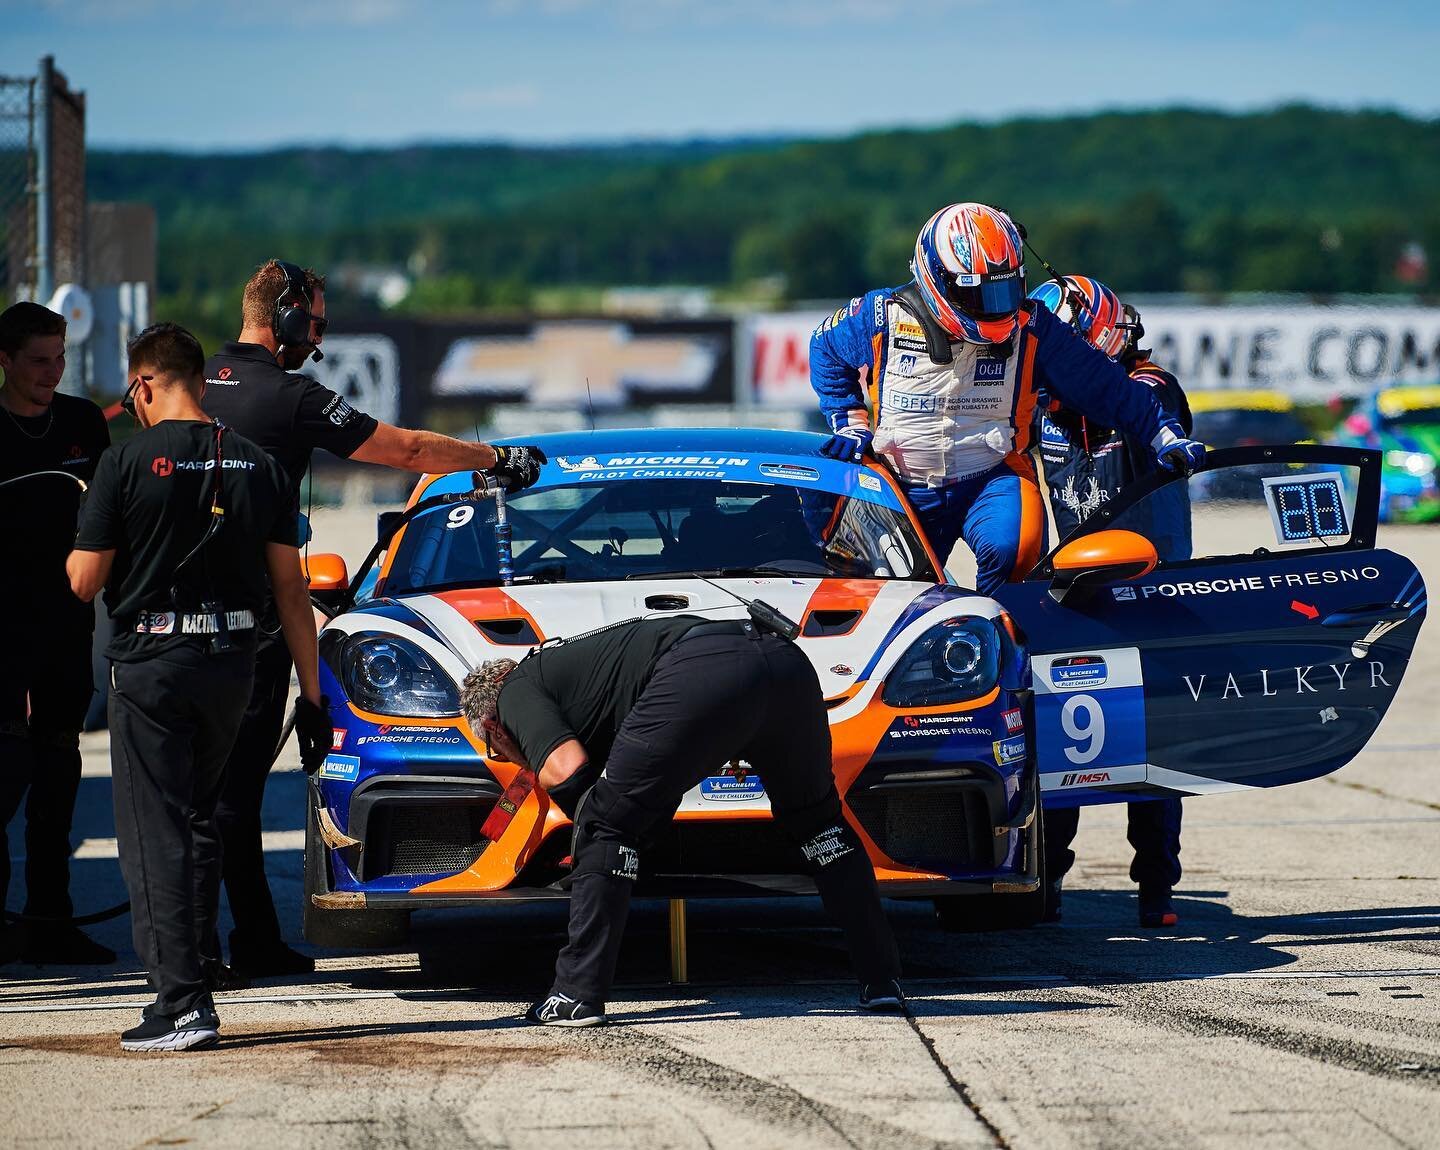 #ThrowbackThursday to when we teamed up with the @oghmotorsports drivers at Road America! It was an exciting weekend having them pilot the No. 9 @valkyrieintel Porsche Cayman.

#Hardpoint #Porsche #IMSA #IMPC